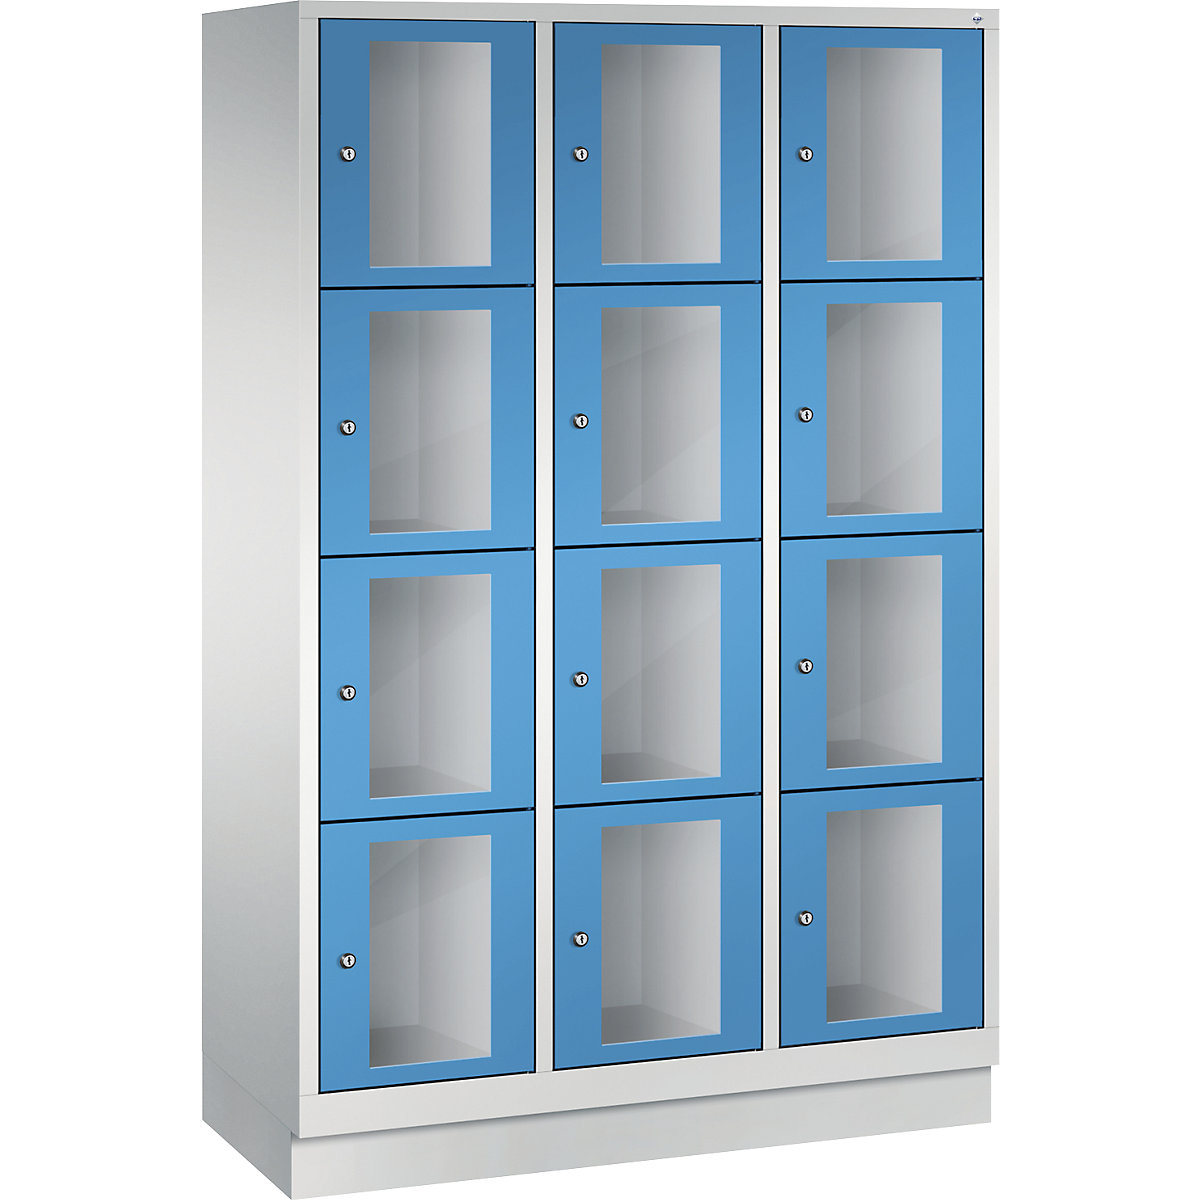 C+P – CLASSIC locker unit, compartment height 375 mm, with plinth, 12 compartments, width 1200 mm, light blue door